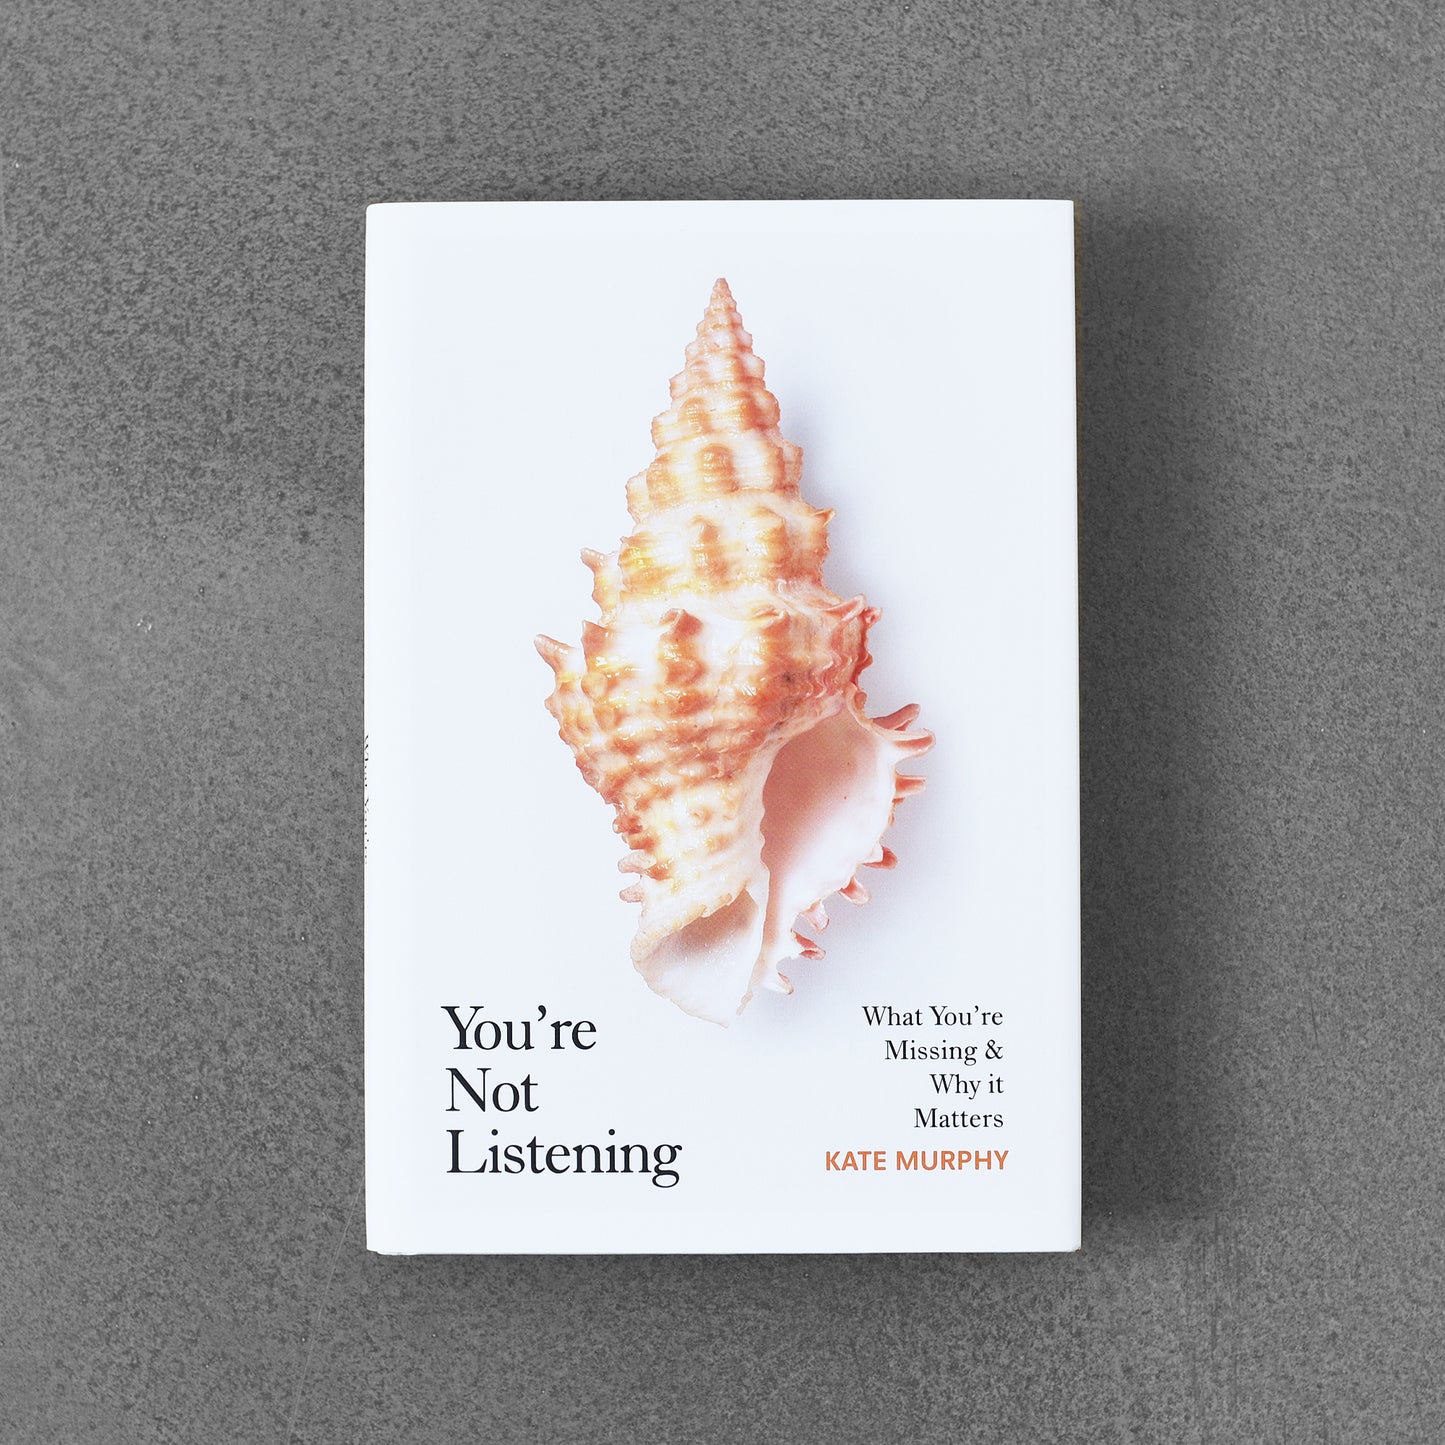 You’re Not Listening: What You’re Missing & Why It Matters - Kate Murphy